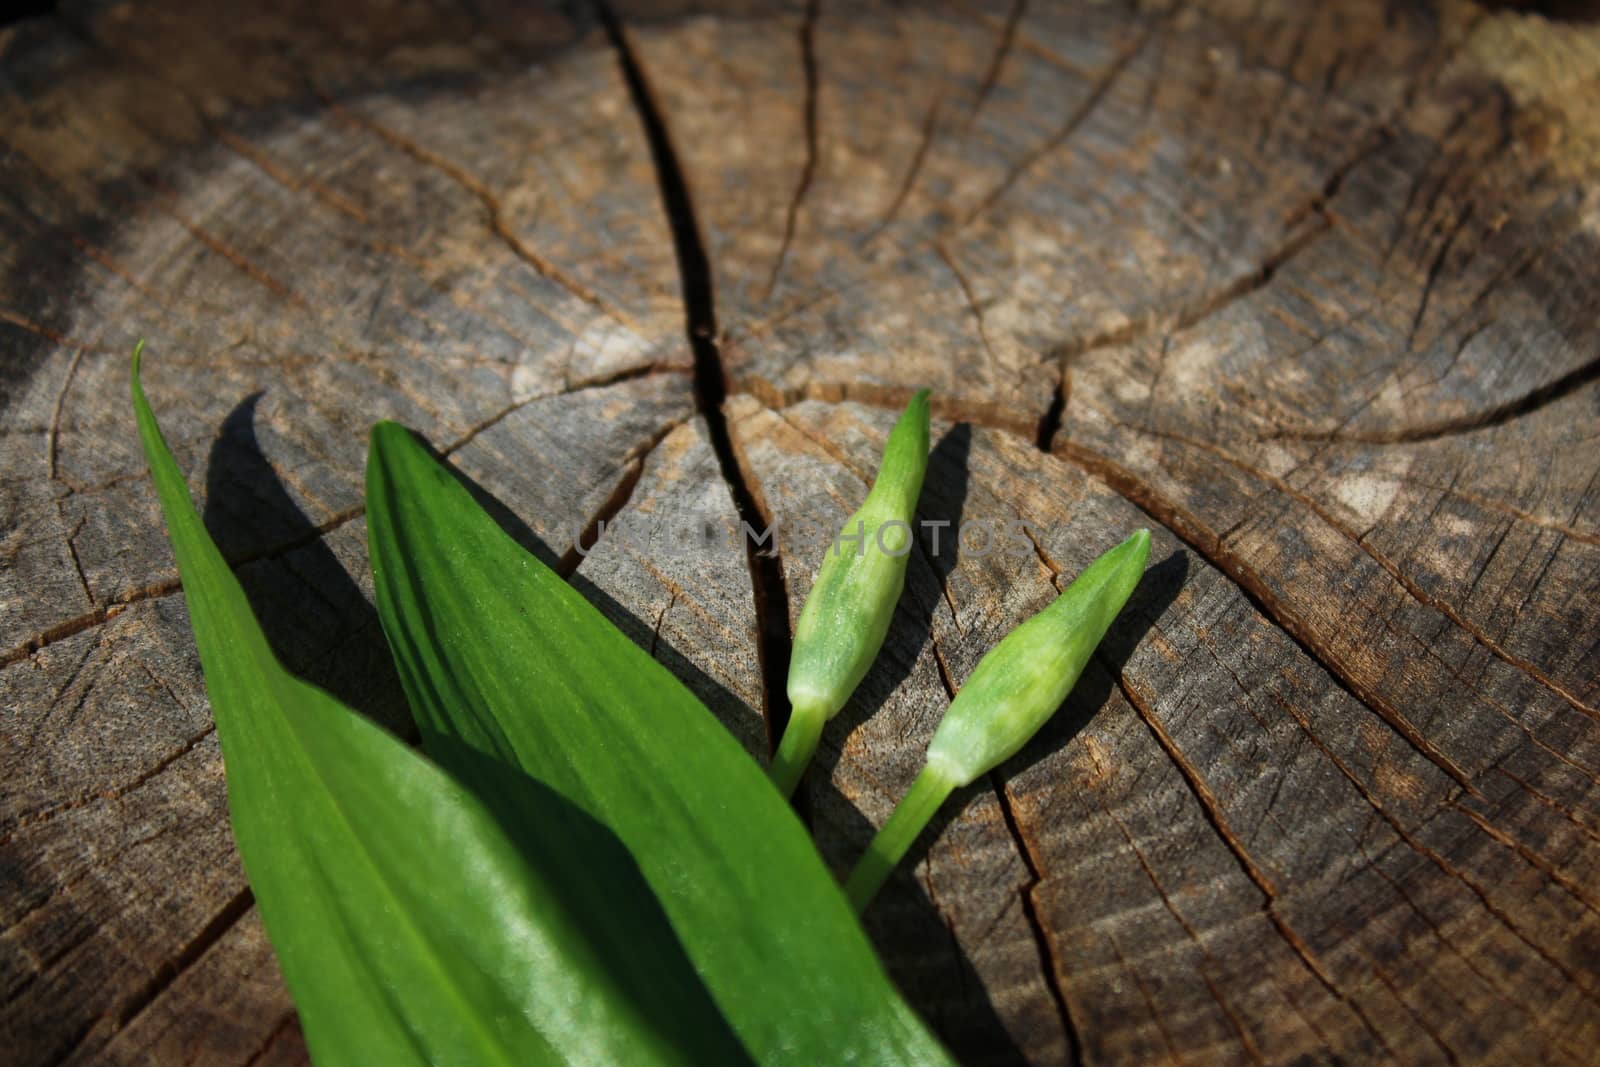 The picture shows wild garlic on an old wood.